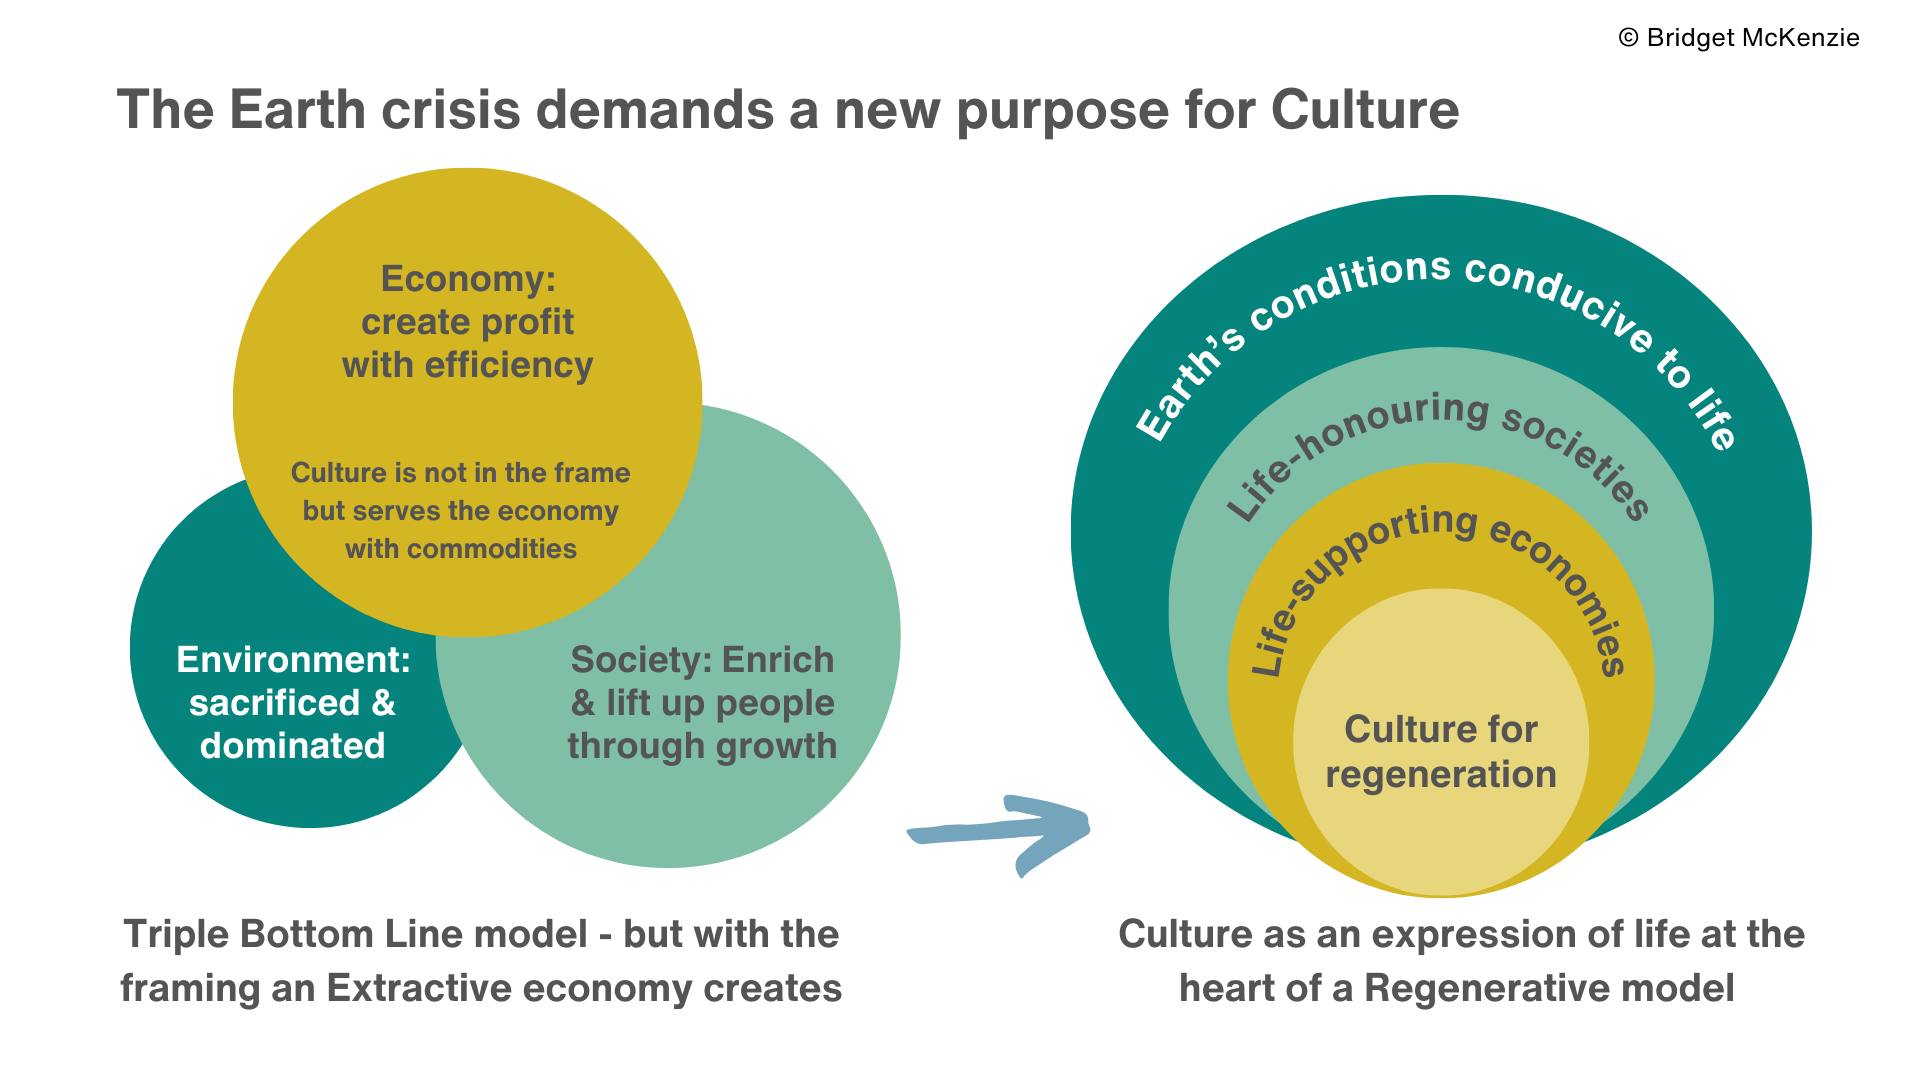 The Roles of Culture in Response to the Earth Crisis